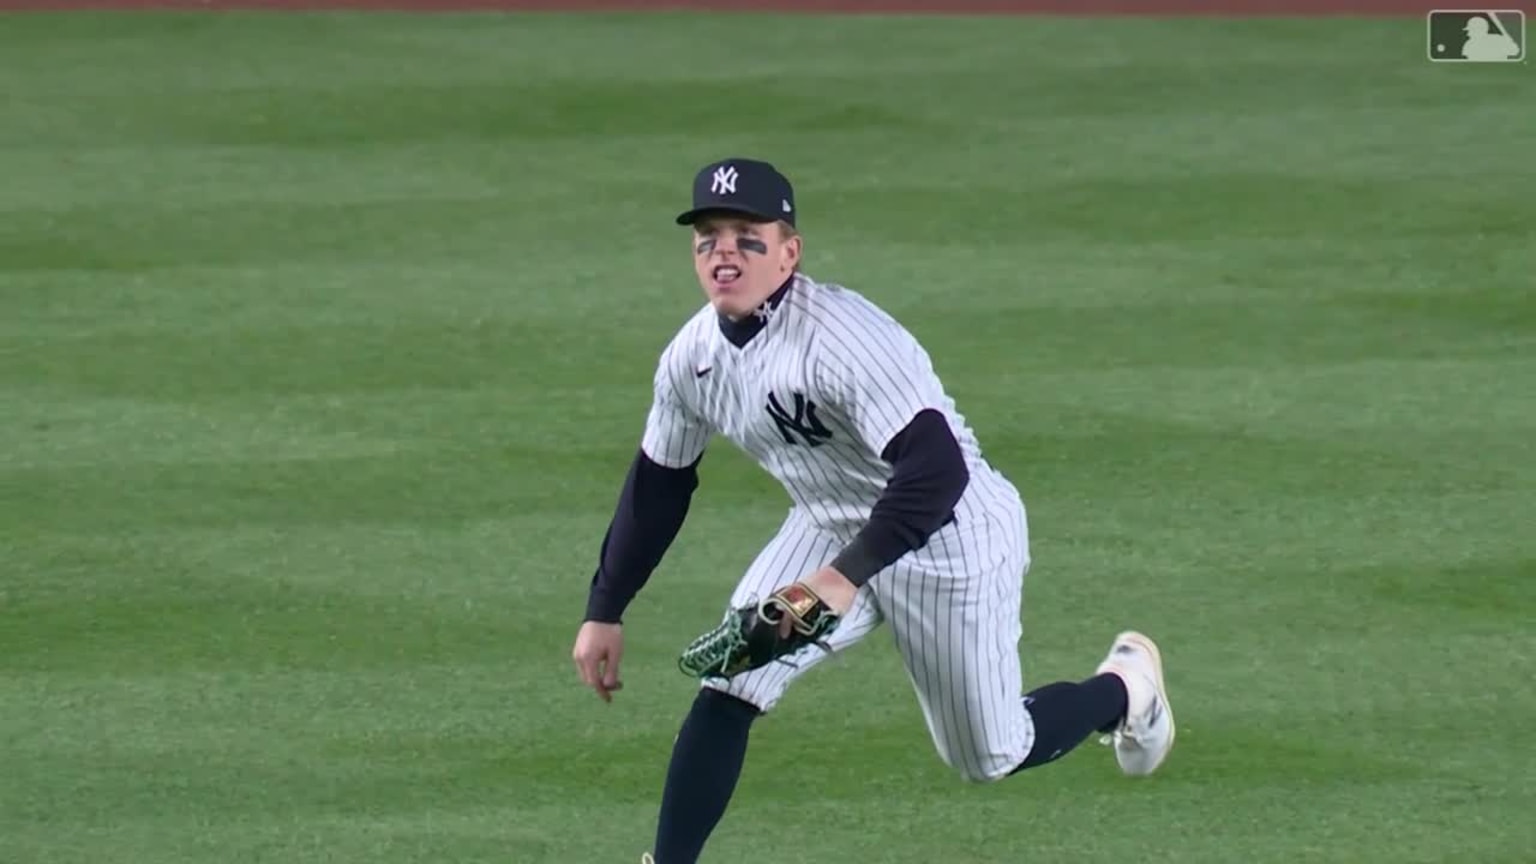 I can get used to watching Harrison Bader in c yankees gear near